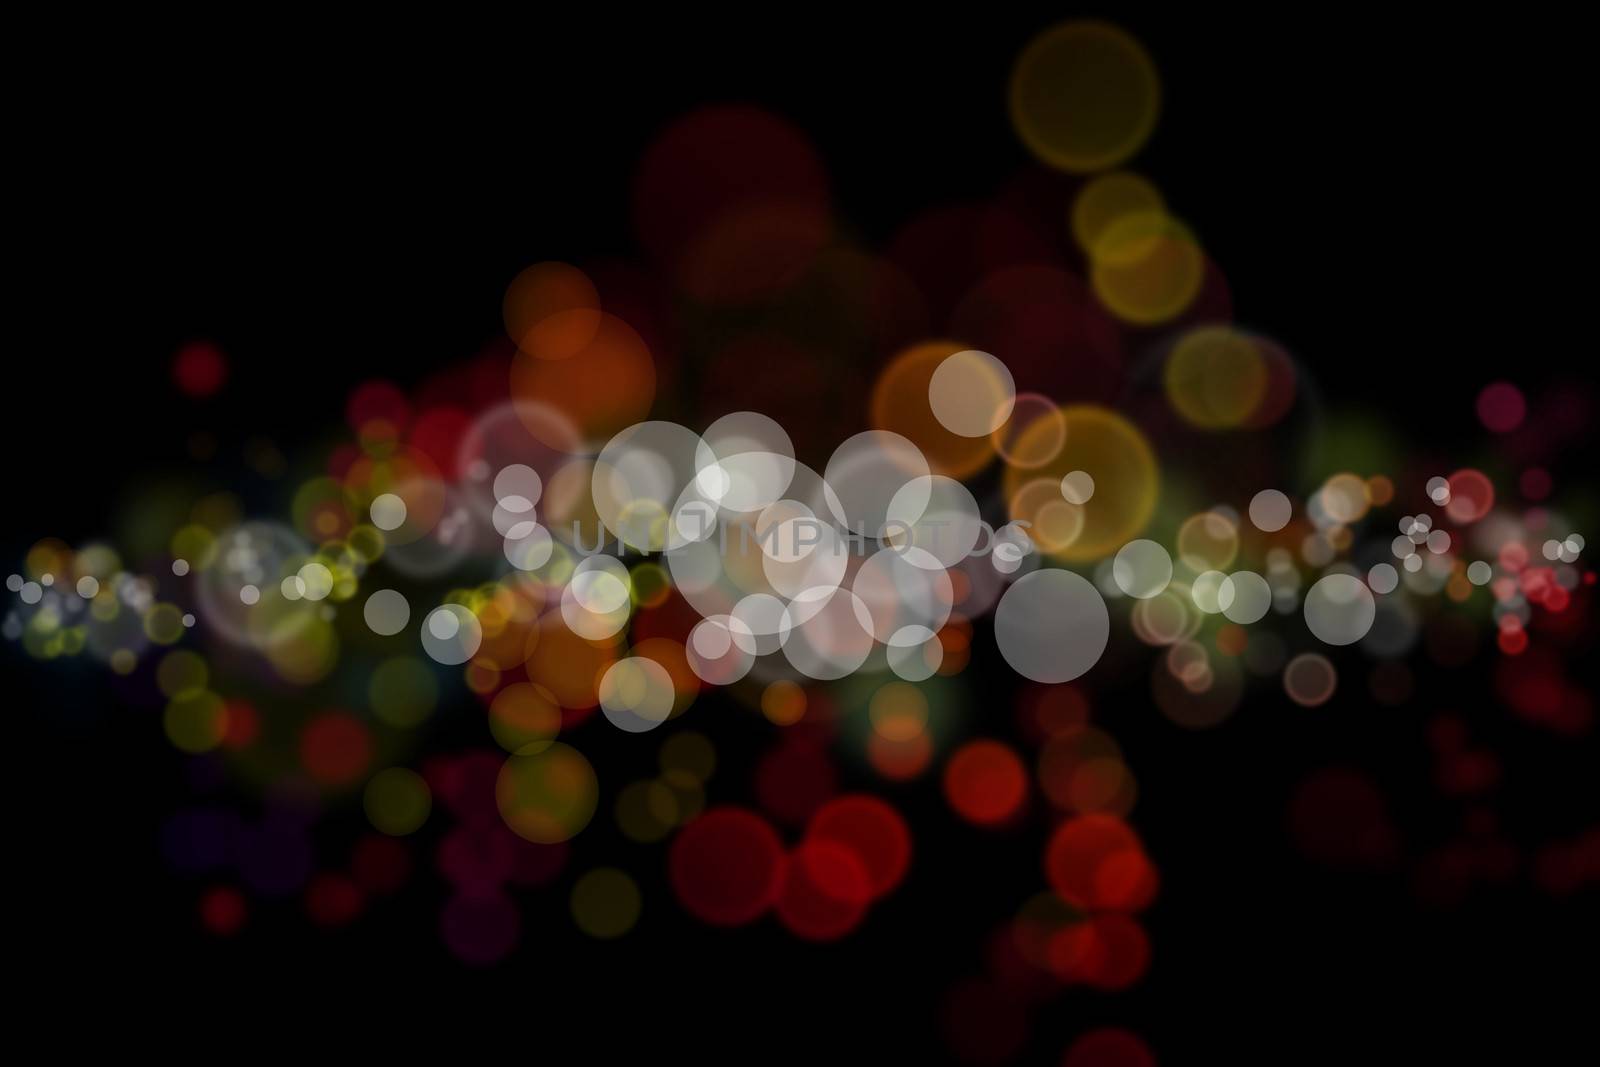 Colorful circles of light abstract background